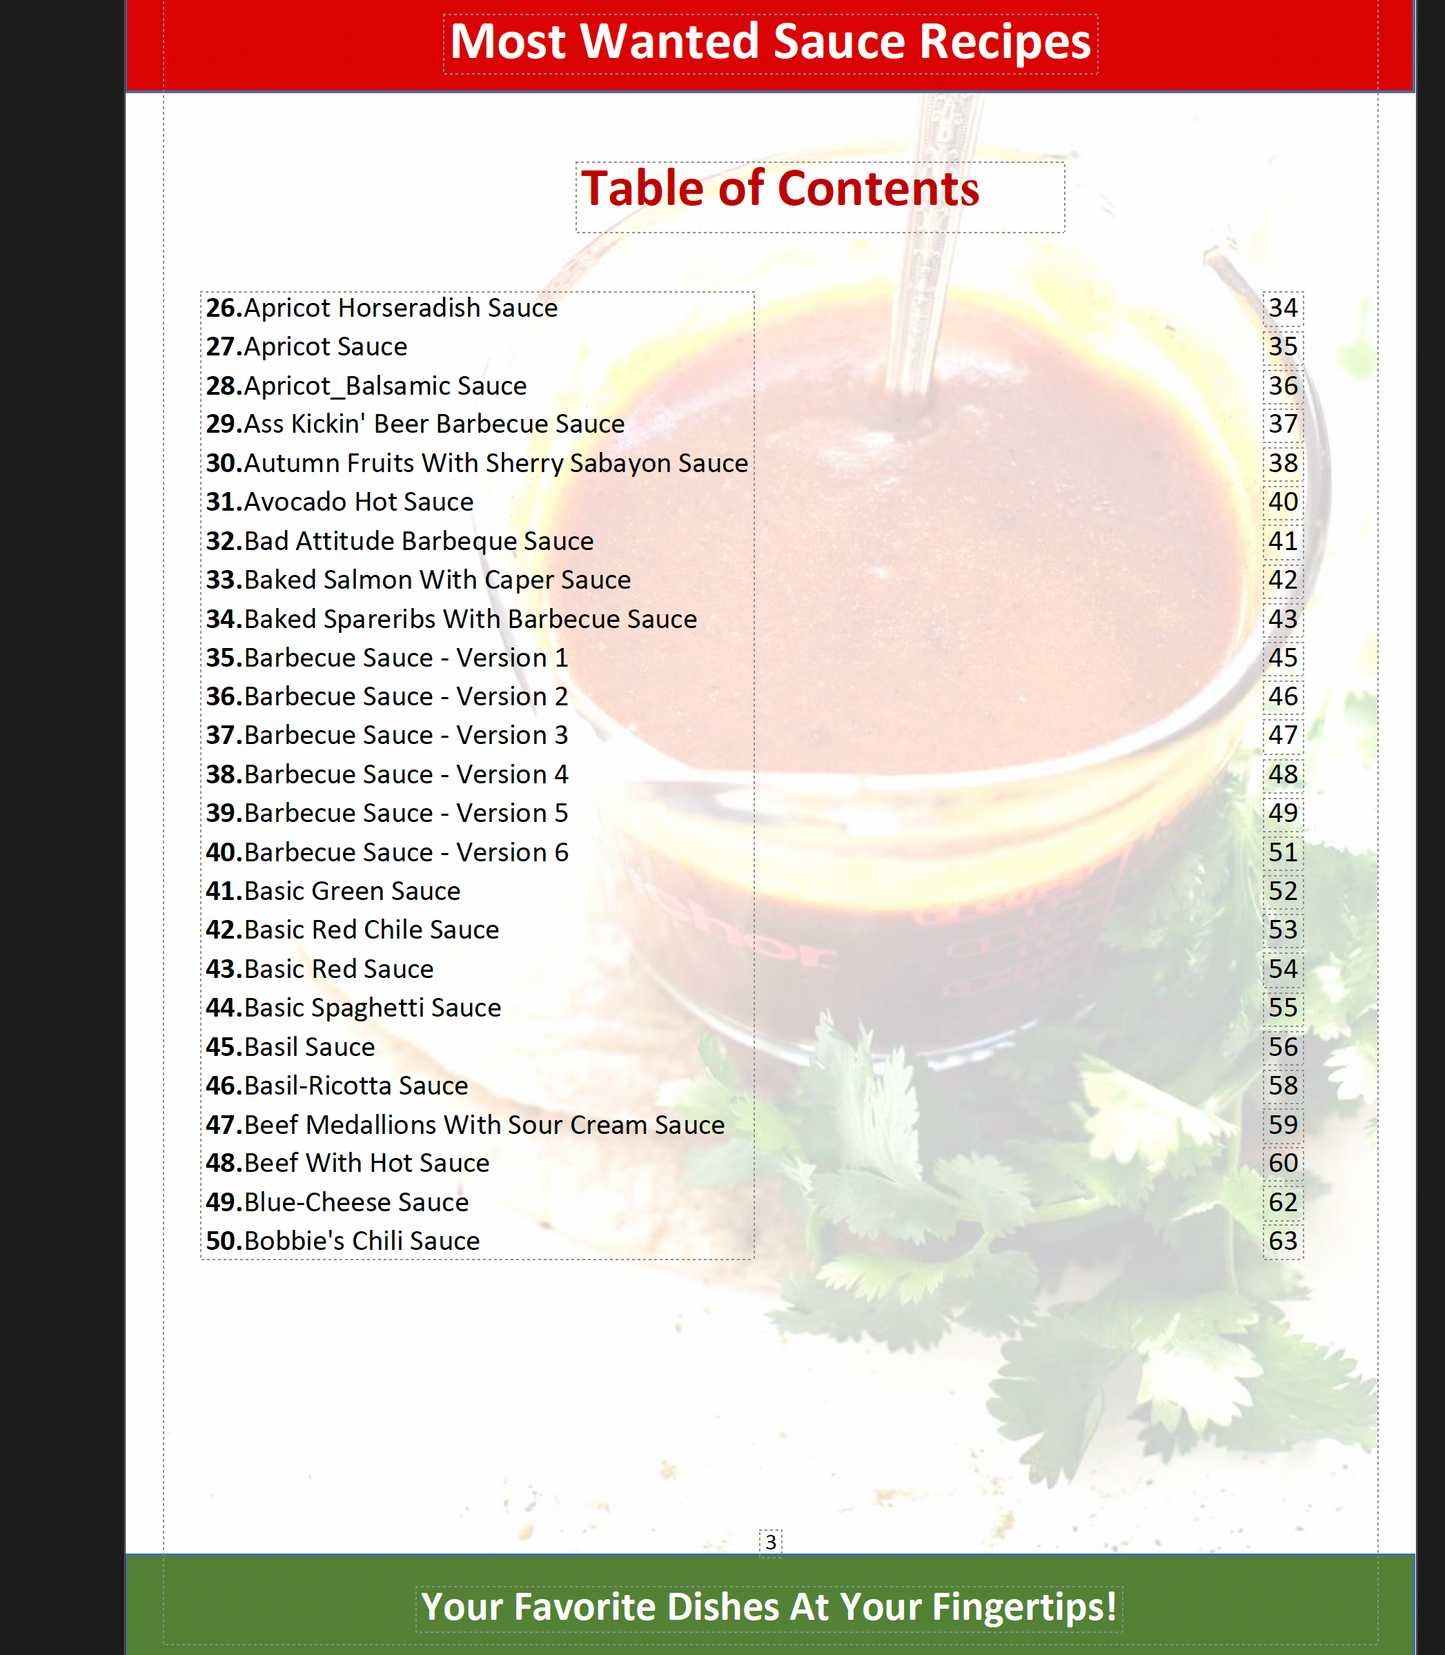 Most Wanted Sauce Recipes